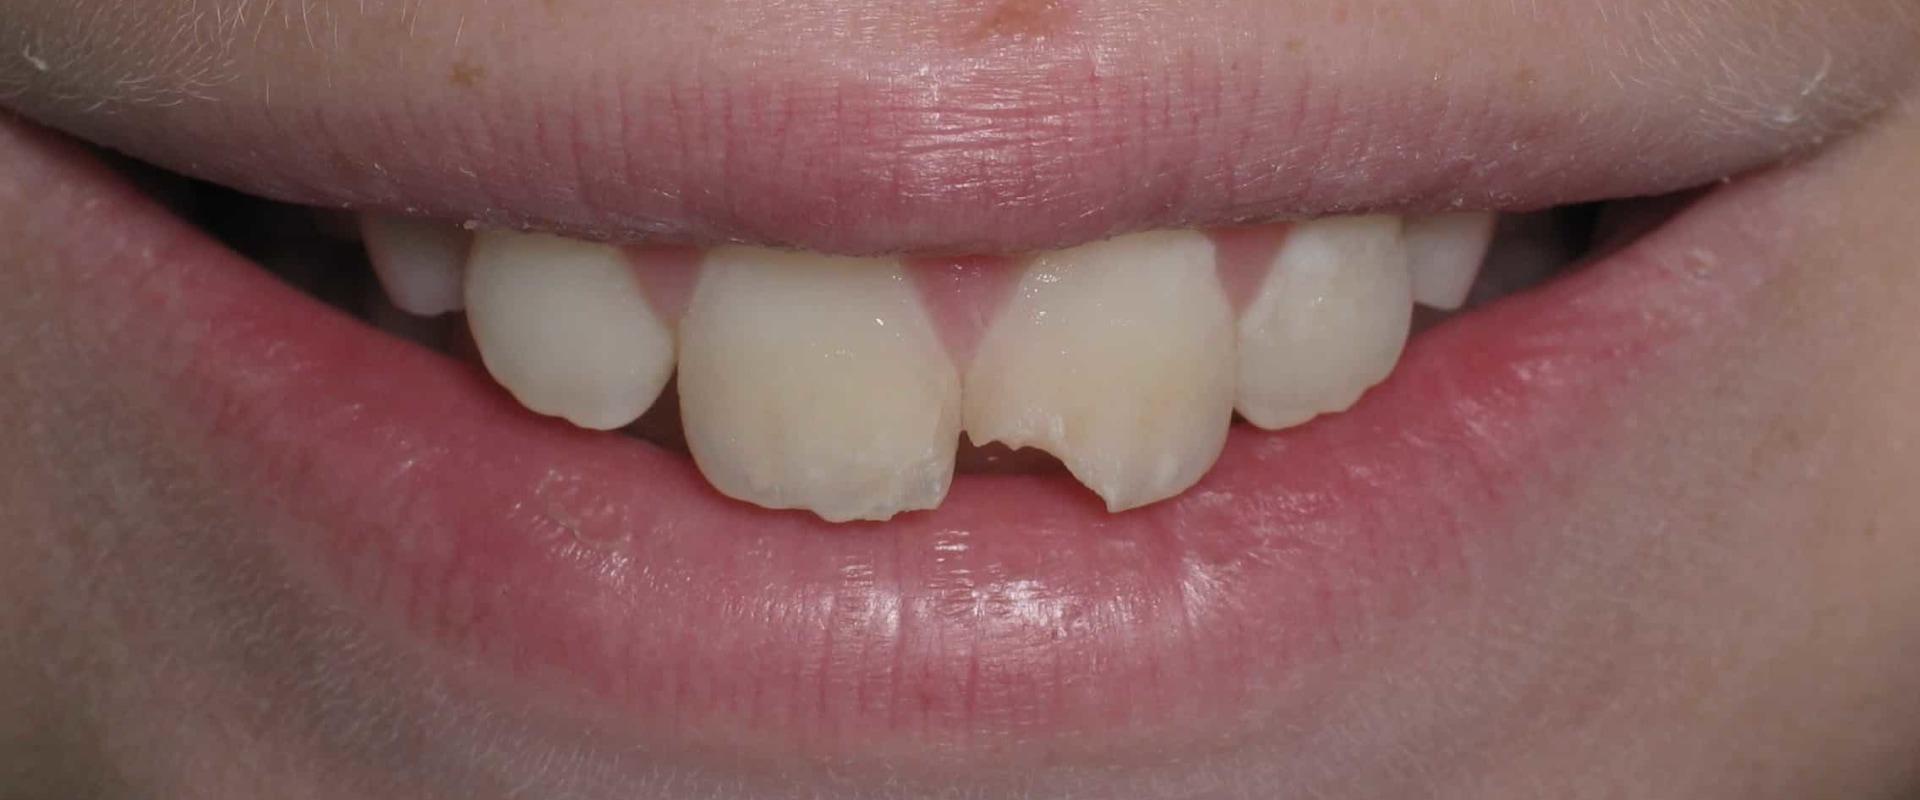 Can a Chipped Tooth Heal on Its Own?